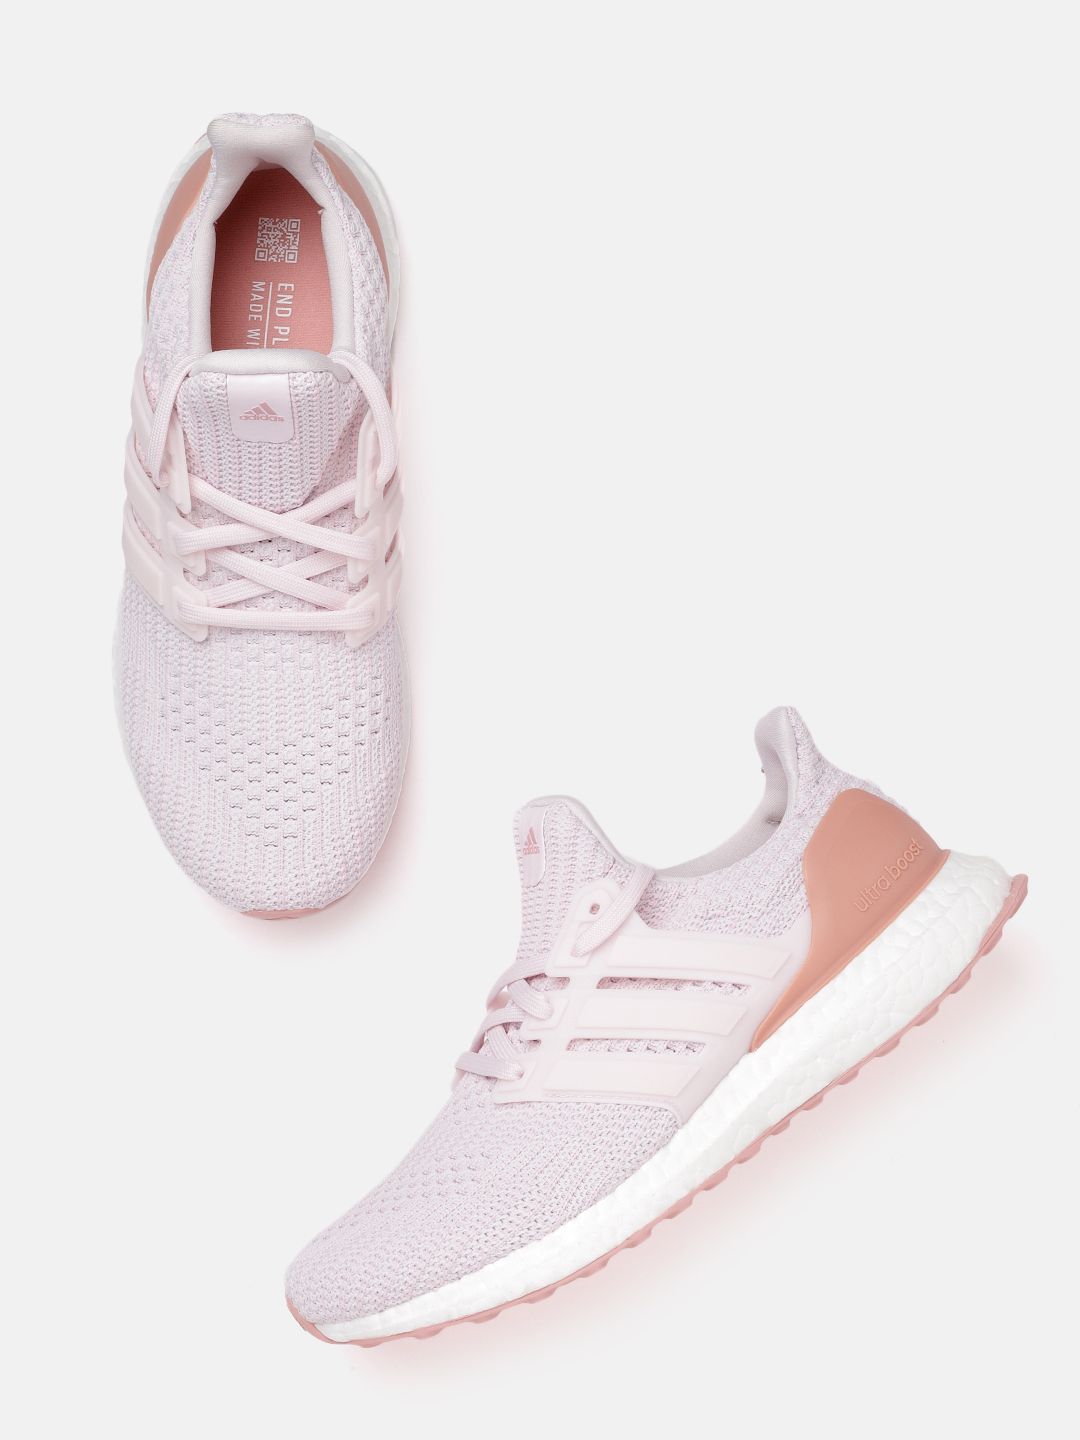 ADIDAS Women Peach-Coloured Woven Design Ultraboost 4.0 DNA Sustainable Running Shoes Price in India